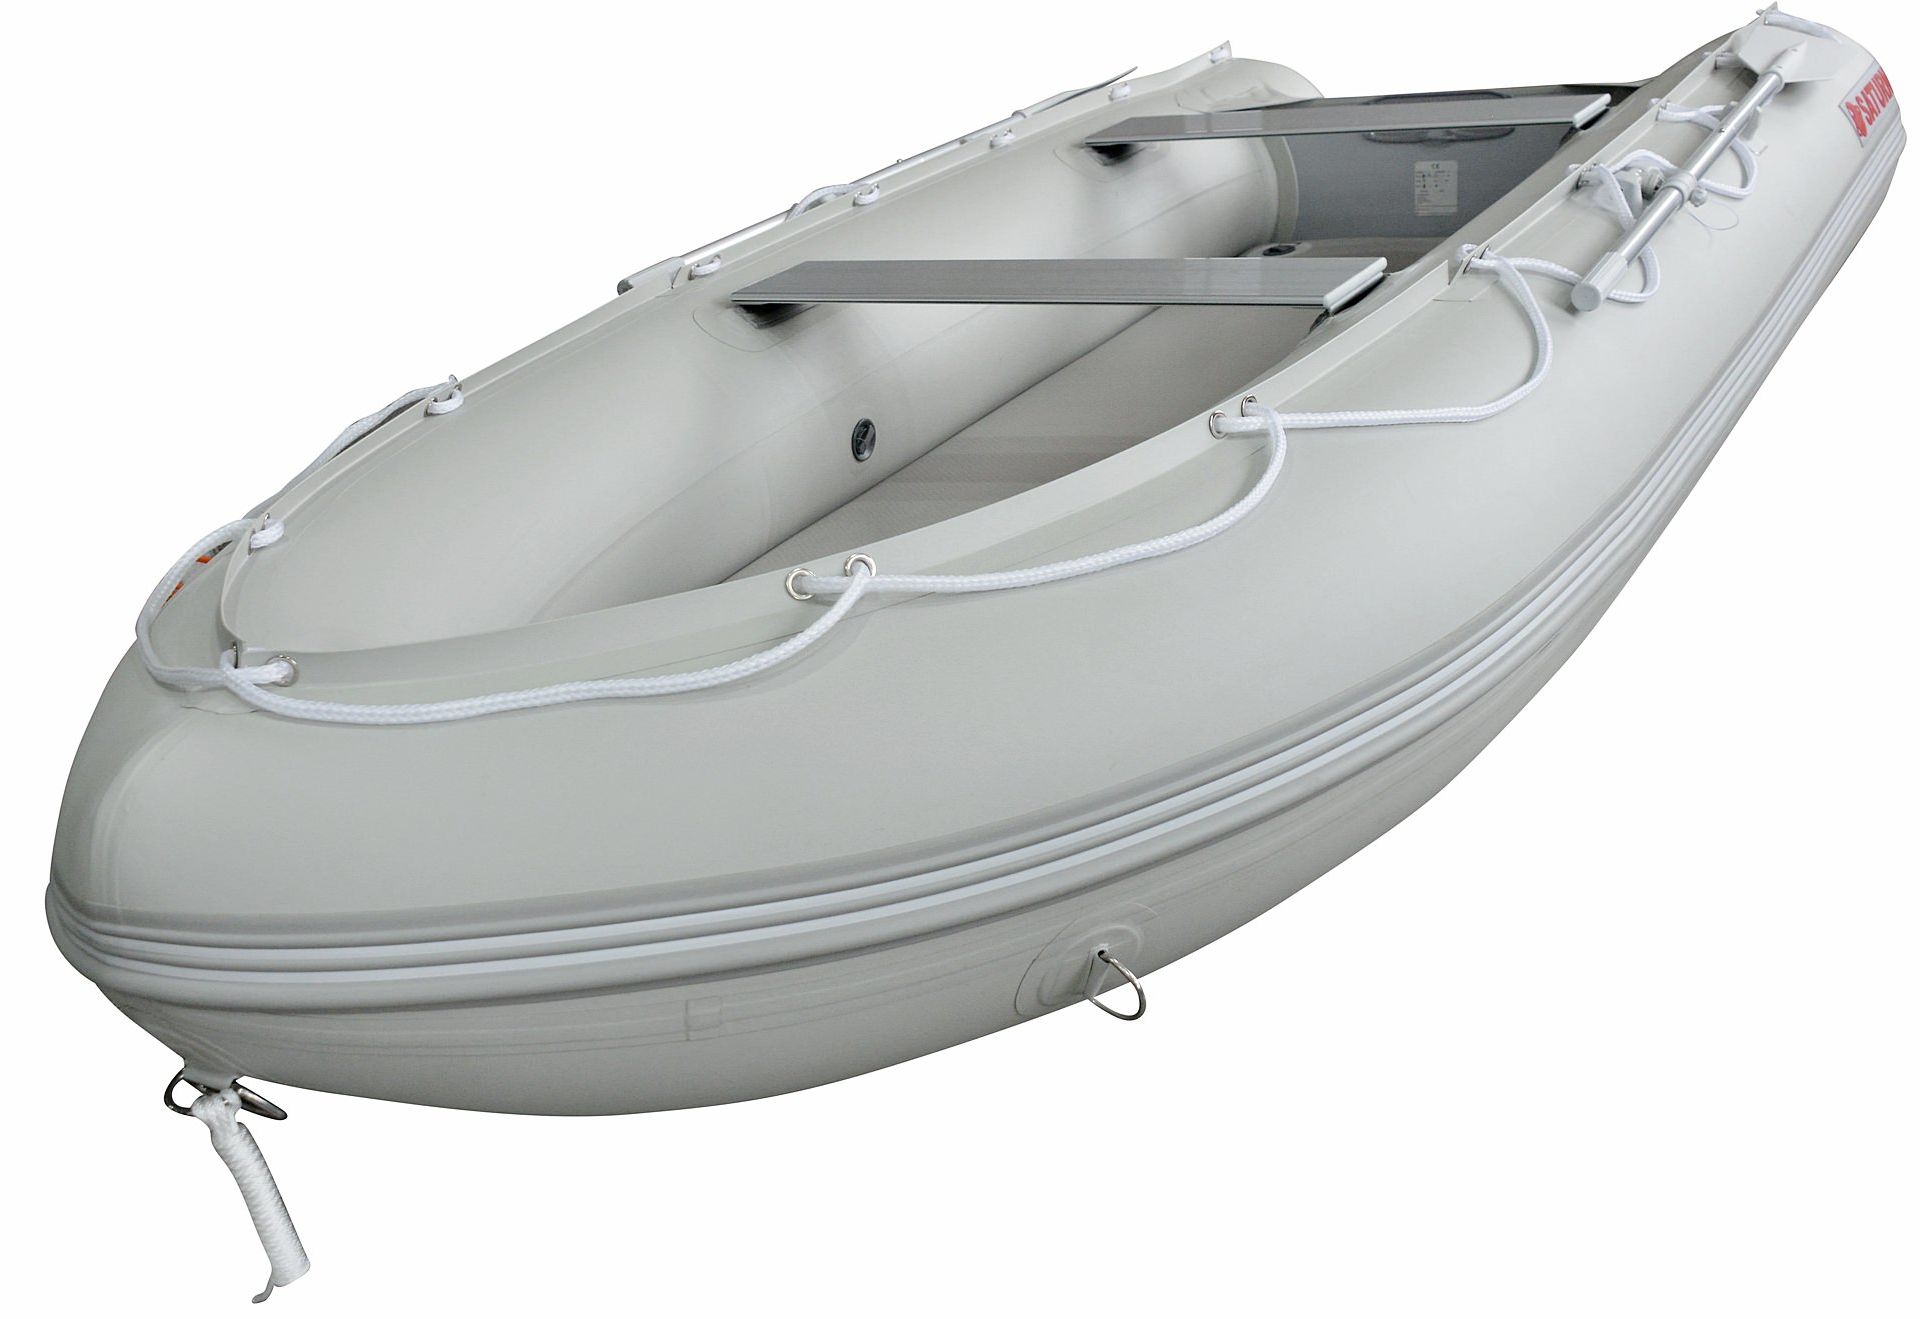 13' Performance Inflatable KaBoat ZK380XL with keel and large tubes.